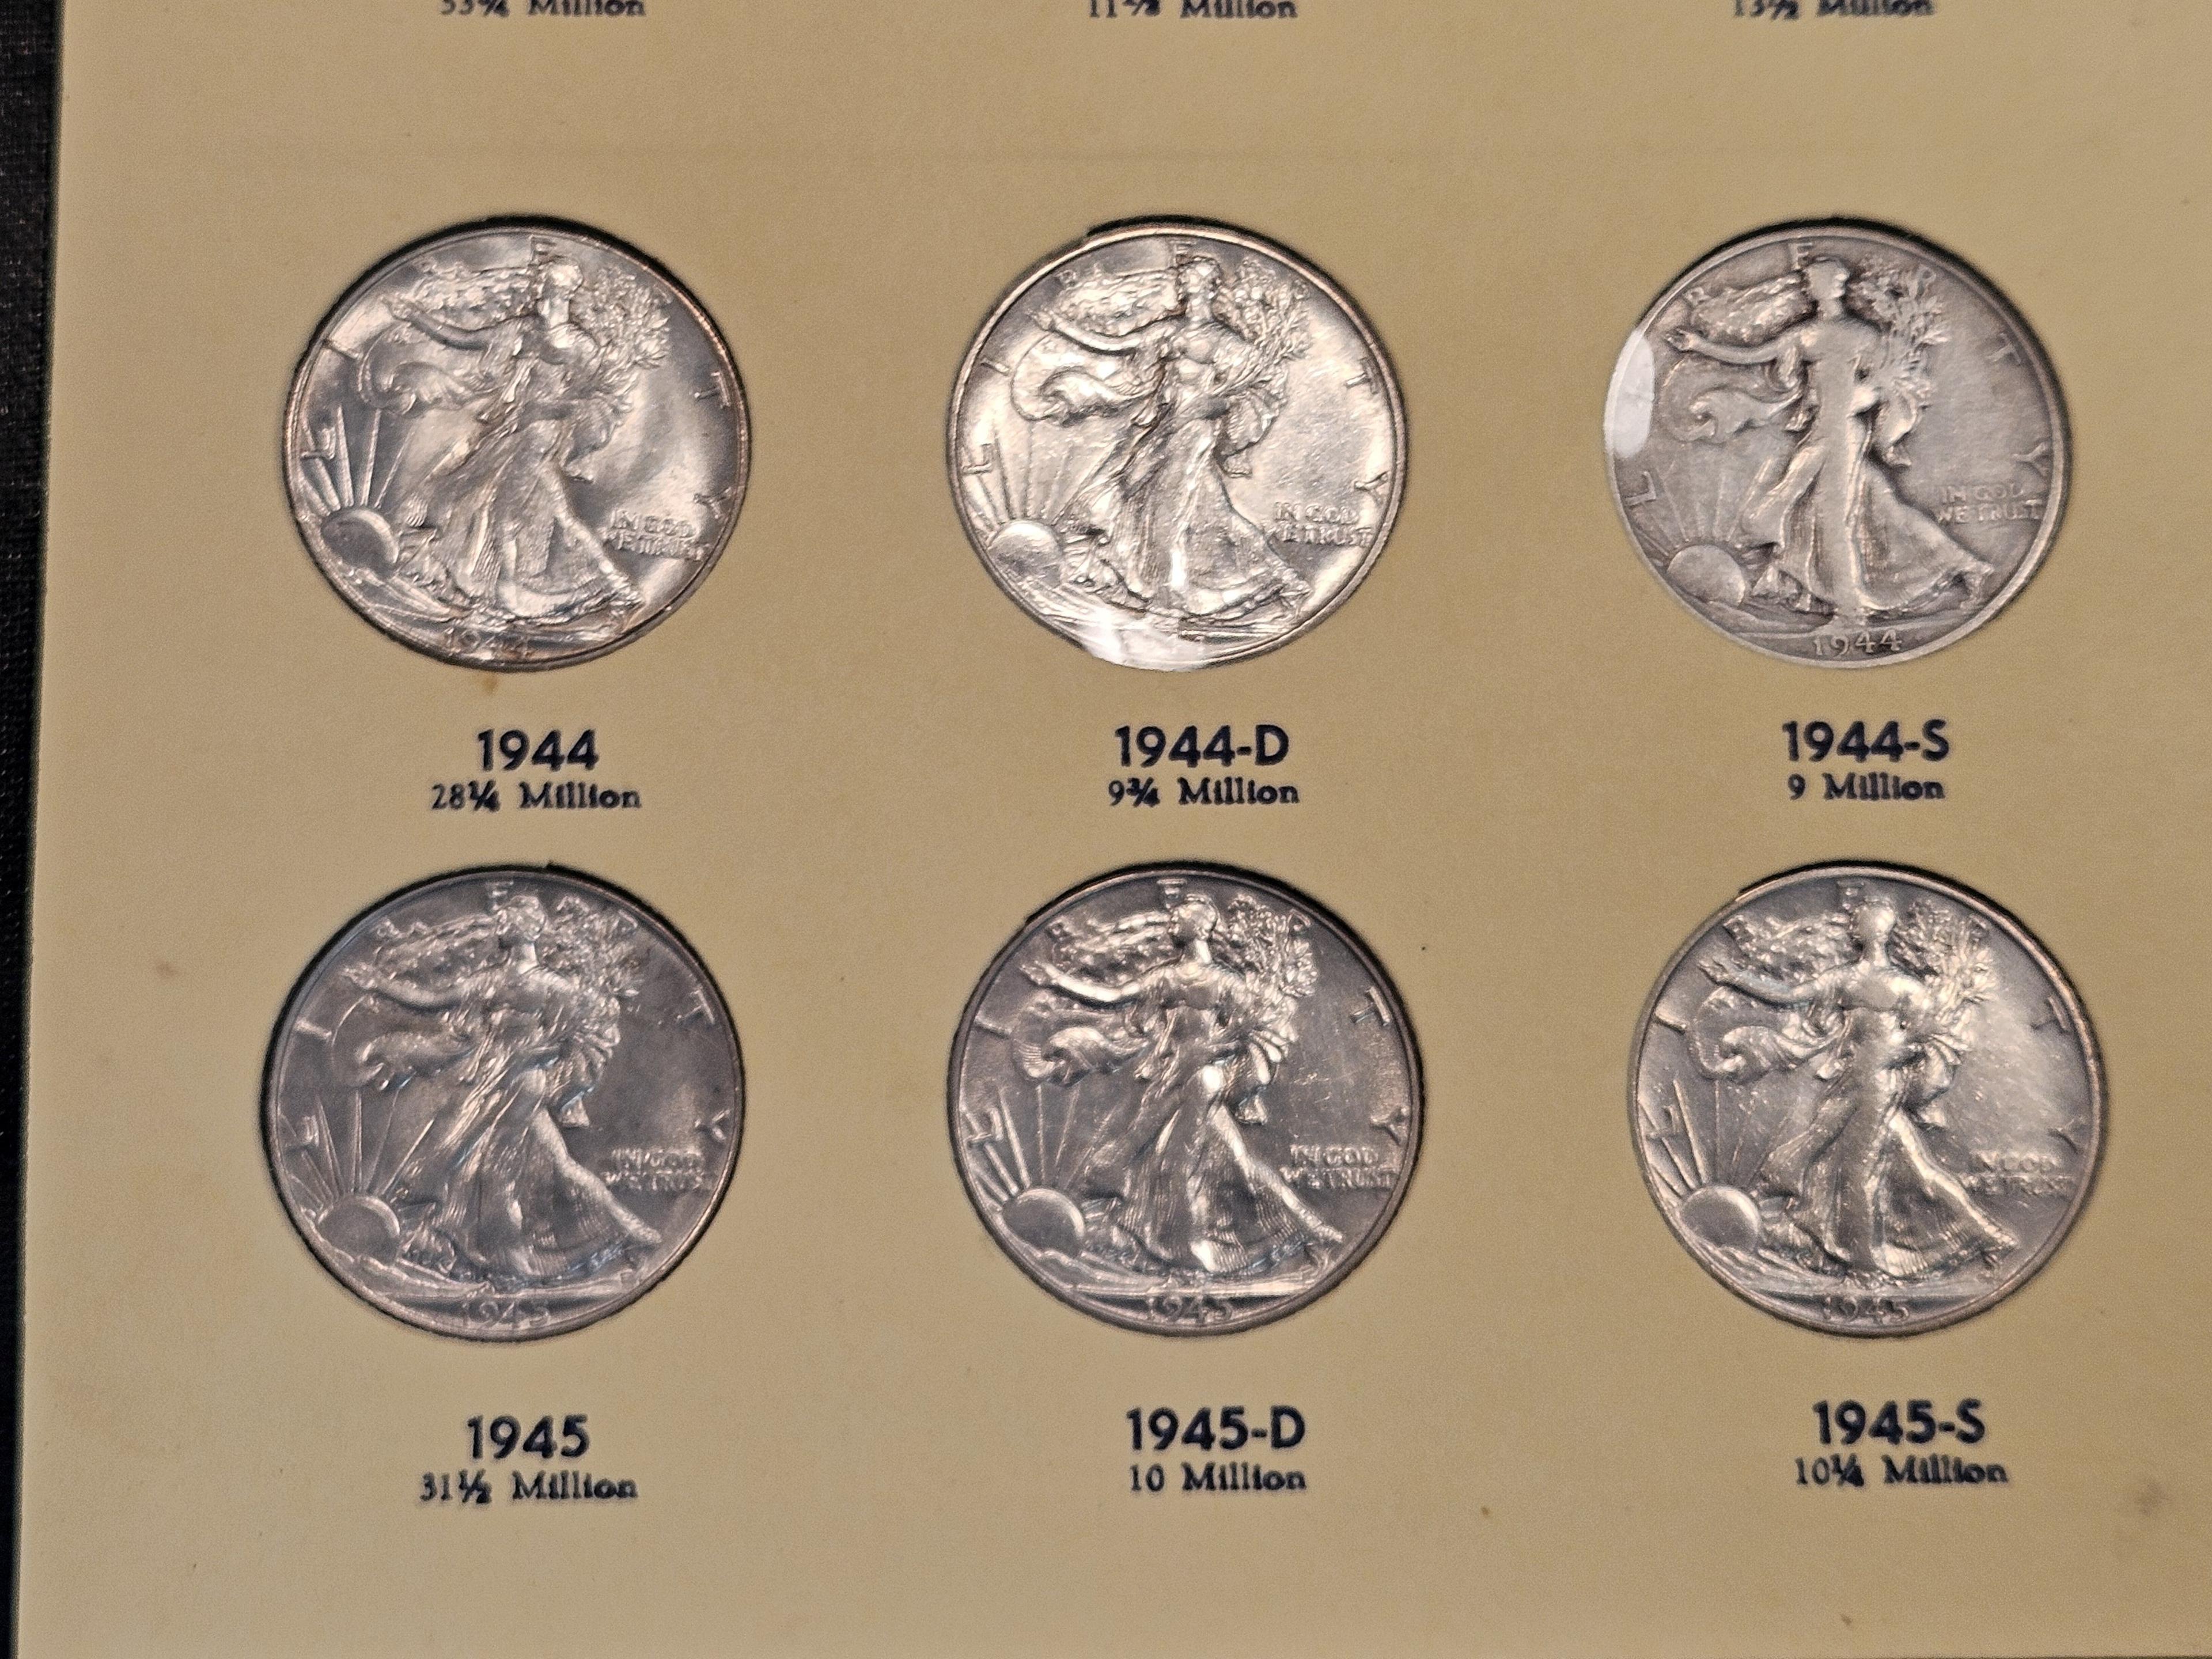 COMPLETE! 1937 - 1947 Walking Liberty silver Half Dollar Collection